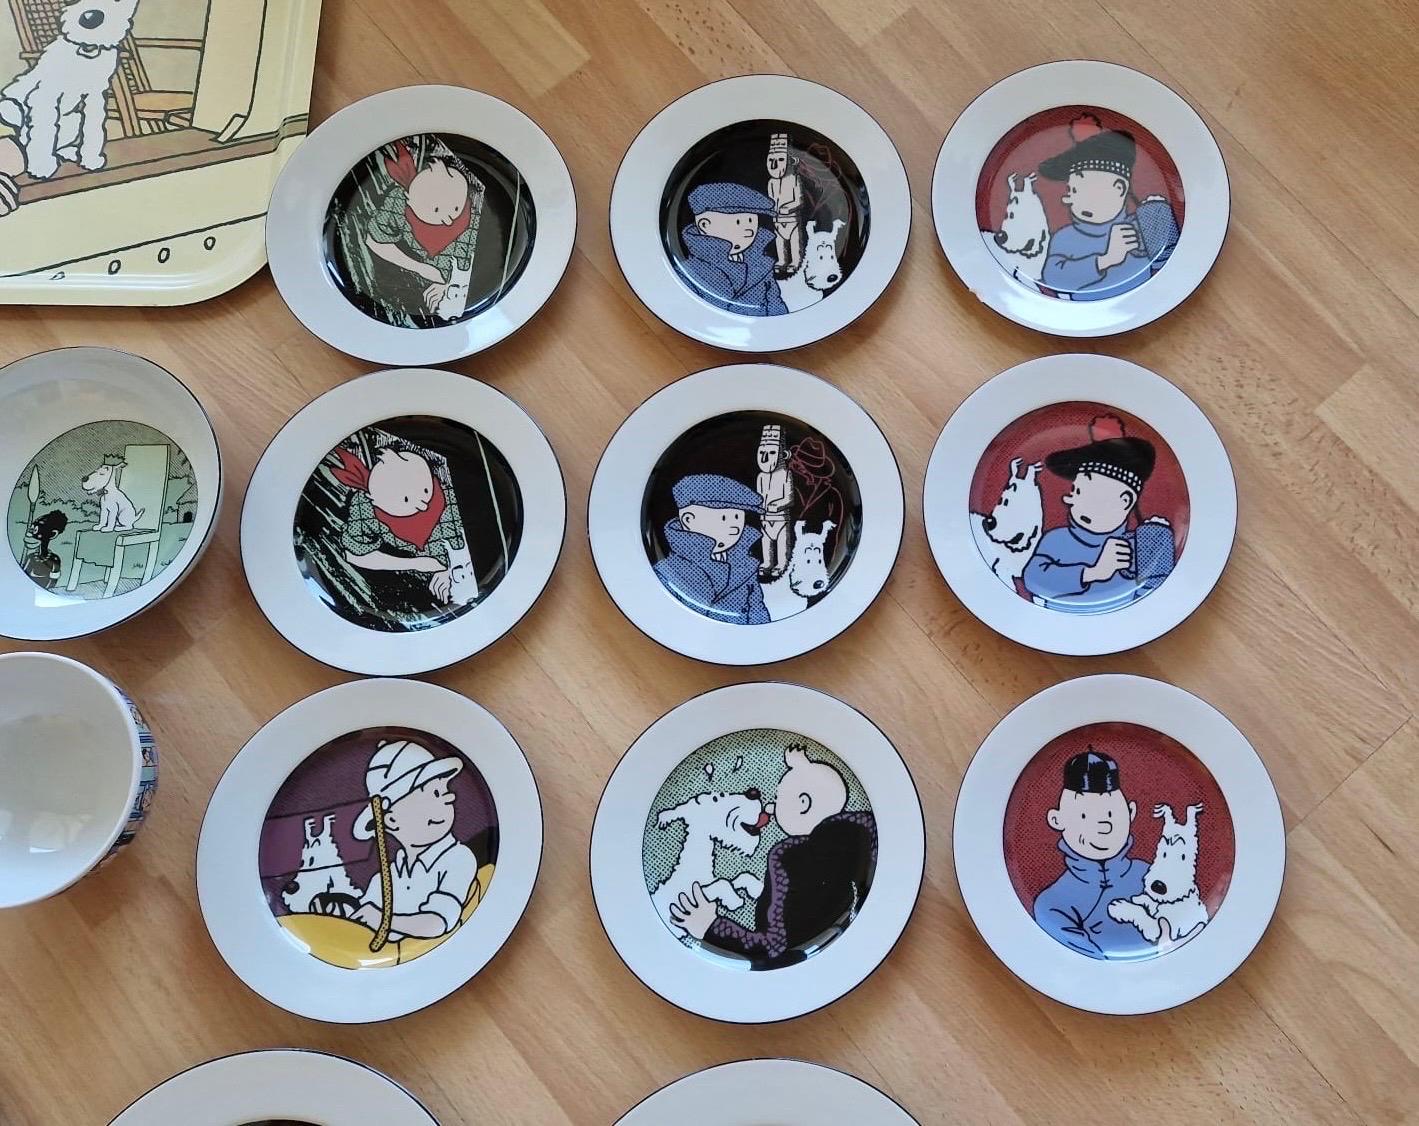 Ultra-rare and  huge collection of famous TinTin porcelain Dish made in the 1980s as a  Collector Edition by AXIS,Paris .
On the international markets it is only possible to get sometimes a smaller amount of pieces or single items of this old